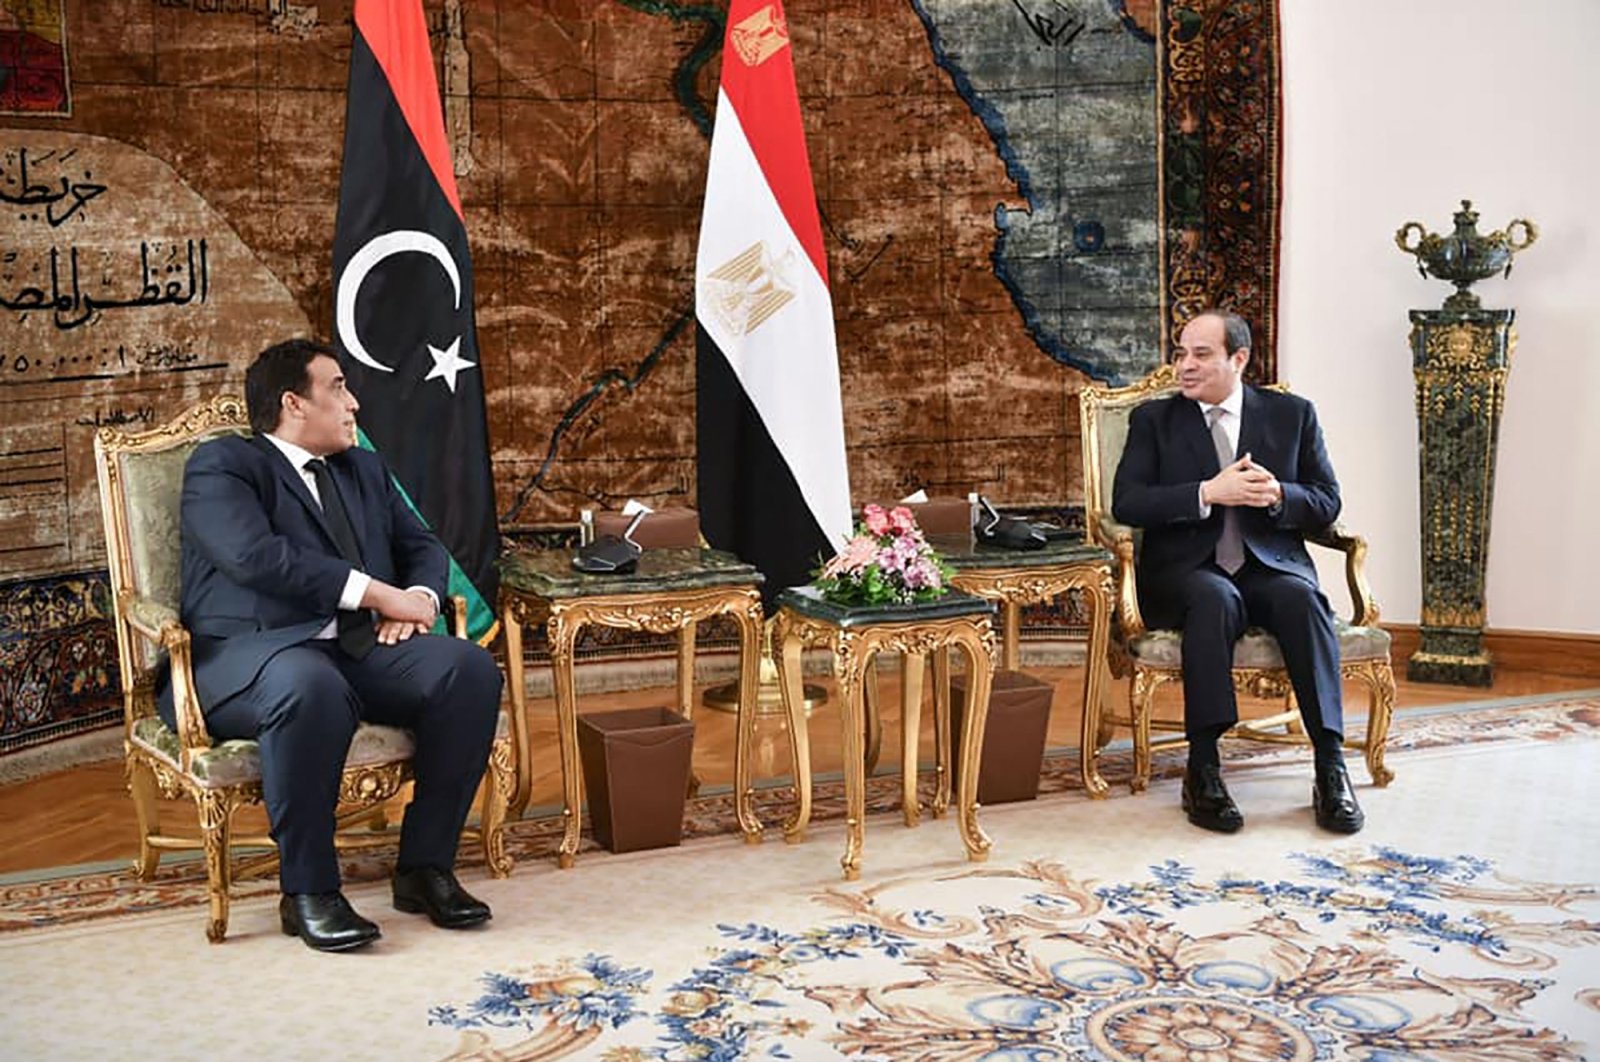 A handout picture received from the Egyptian presidency shows Egypt's President Abdel Fattah el-Sissi (R) during a meeting with the chairperson of Libya's presidency council, Mohamed al-Manfi, in Cairo, Egypt, March 25, 2021. (AFP Photo)